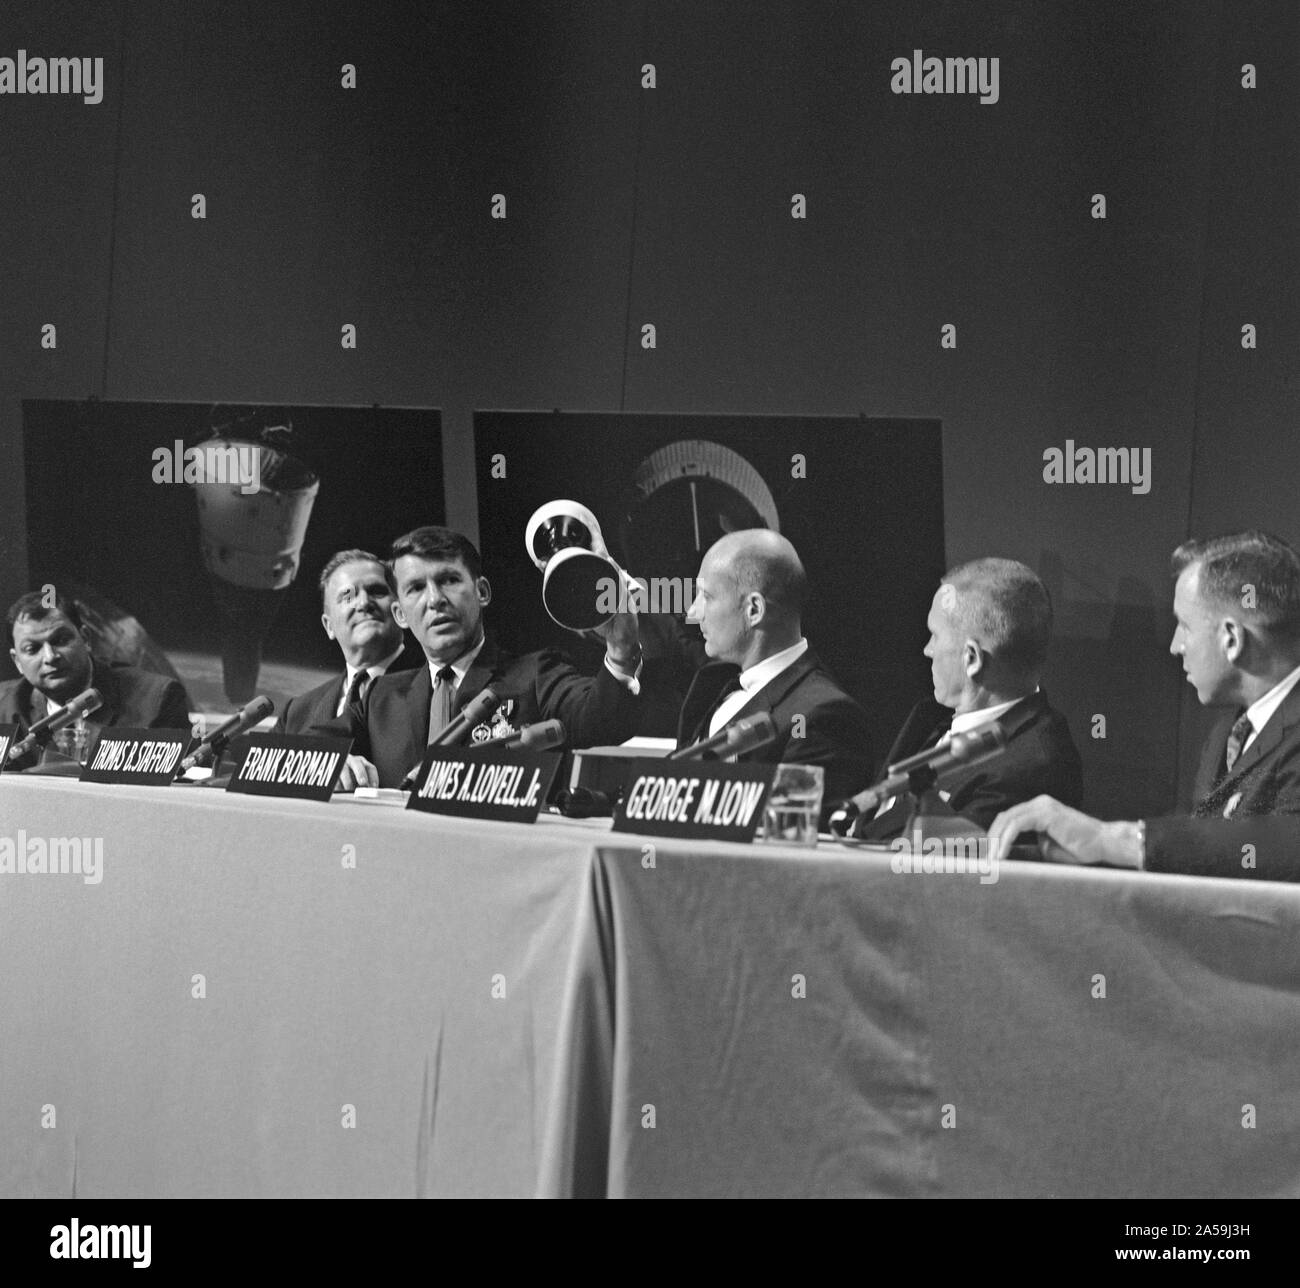 (3 Jan. 1966) --- View of the Gemini 6 and 7 press conference. From right to left are NASA Administrator James E. Webb; MSC Deputy Director George M. Low; and astronauts James A. Lovell Jr., Frank Borman, Thomas B. Stafford and Walter M. Schirra. Stock Photo